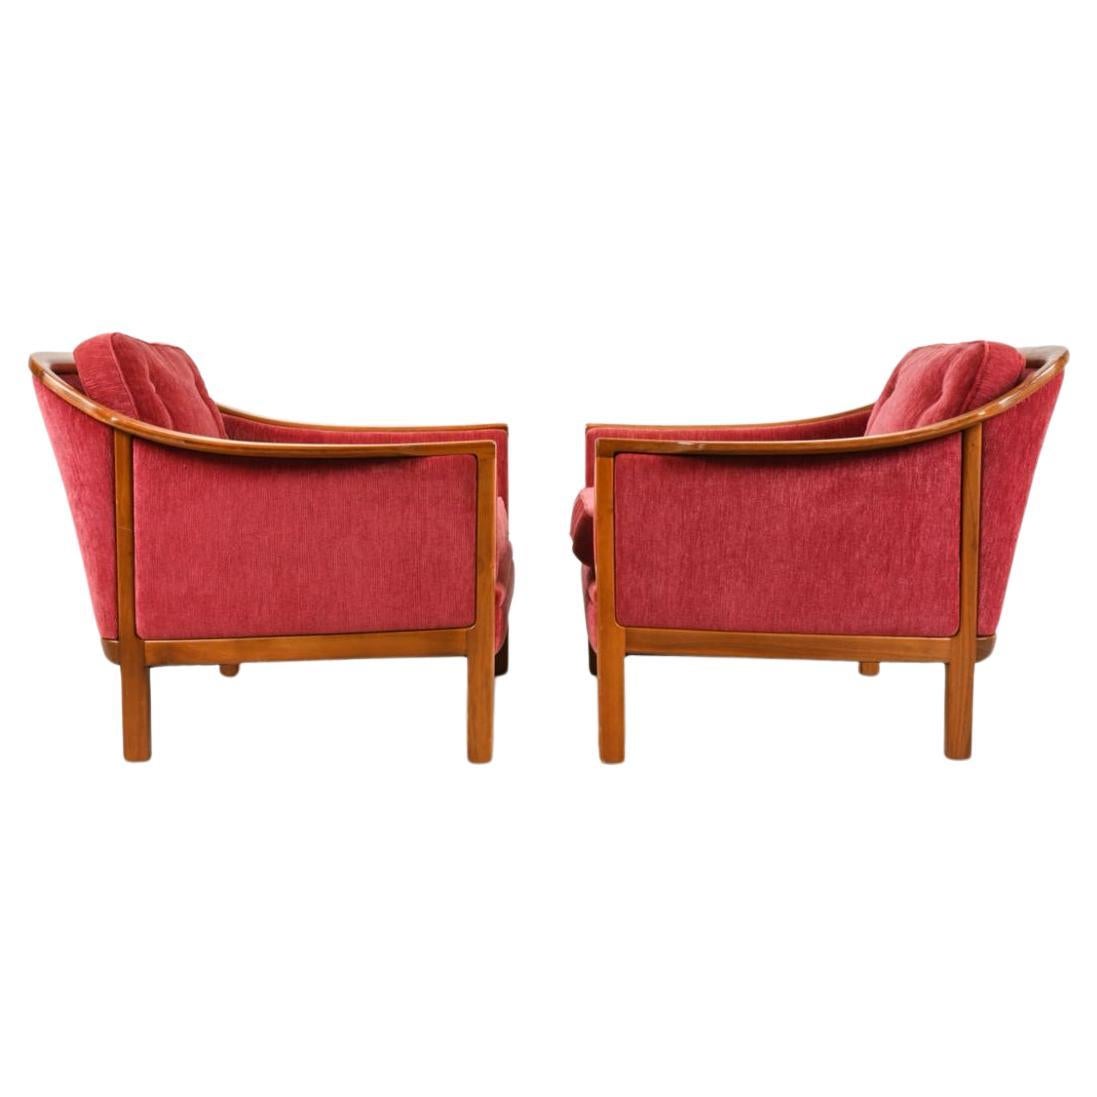 Pair of Beautiful lounge chairs with sculpted teak frames and chenille upholstery. Great Scandinavian designed low lounge chairs. Made in Sweden Circa 1960. Located in Brooklyn NYC.

Dimensions: H 28